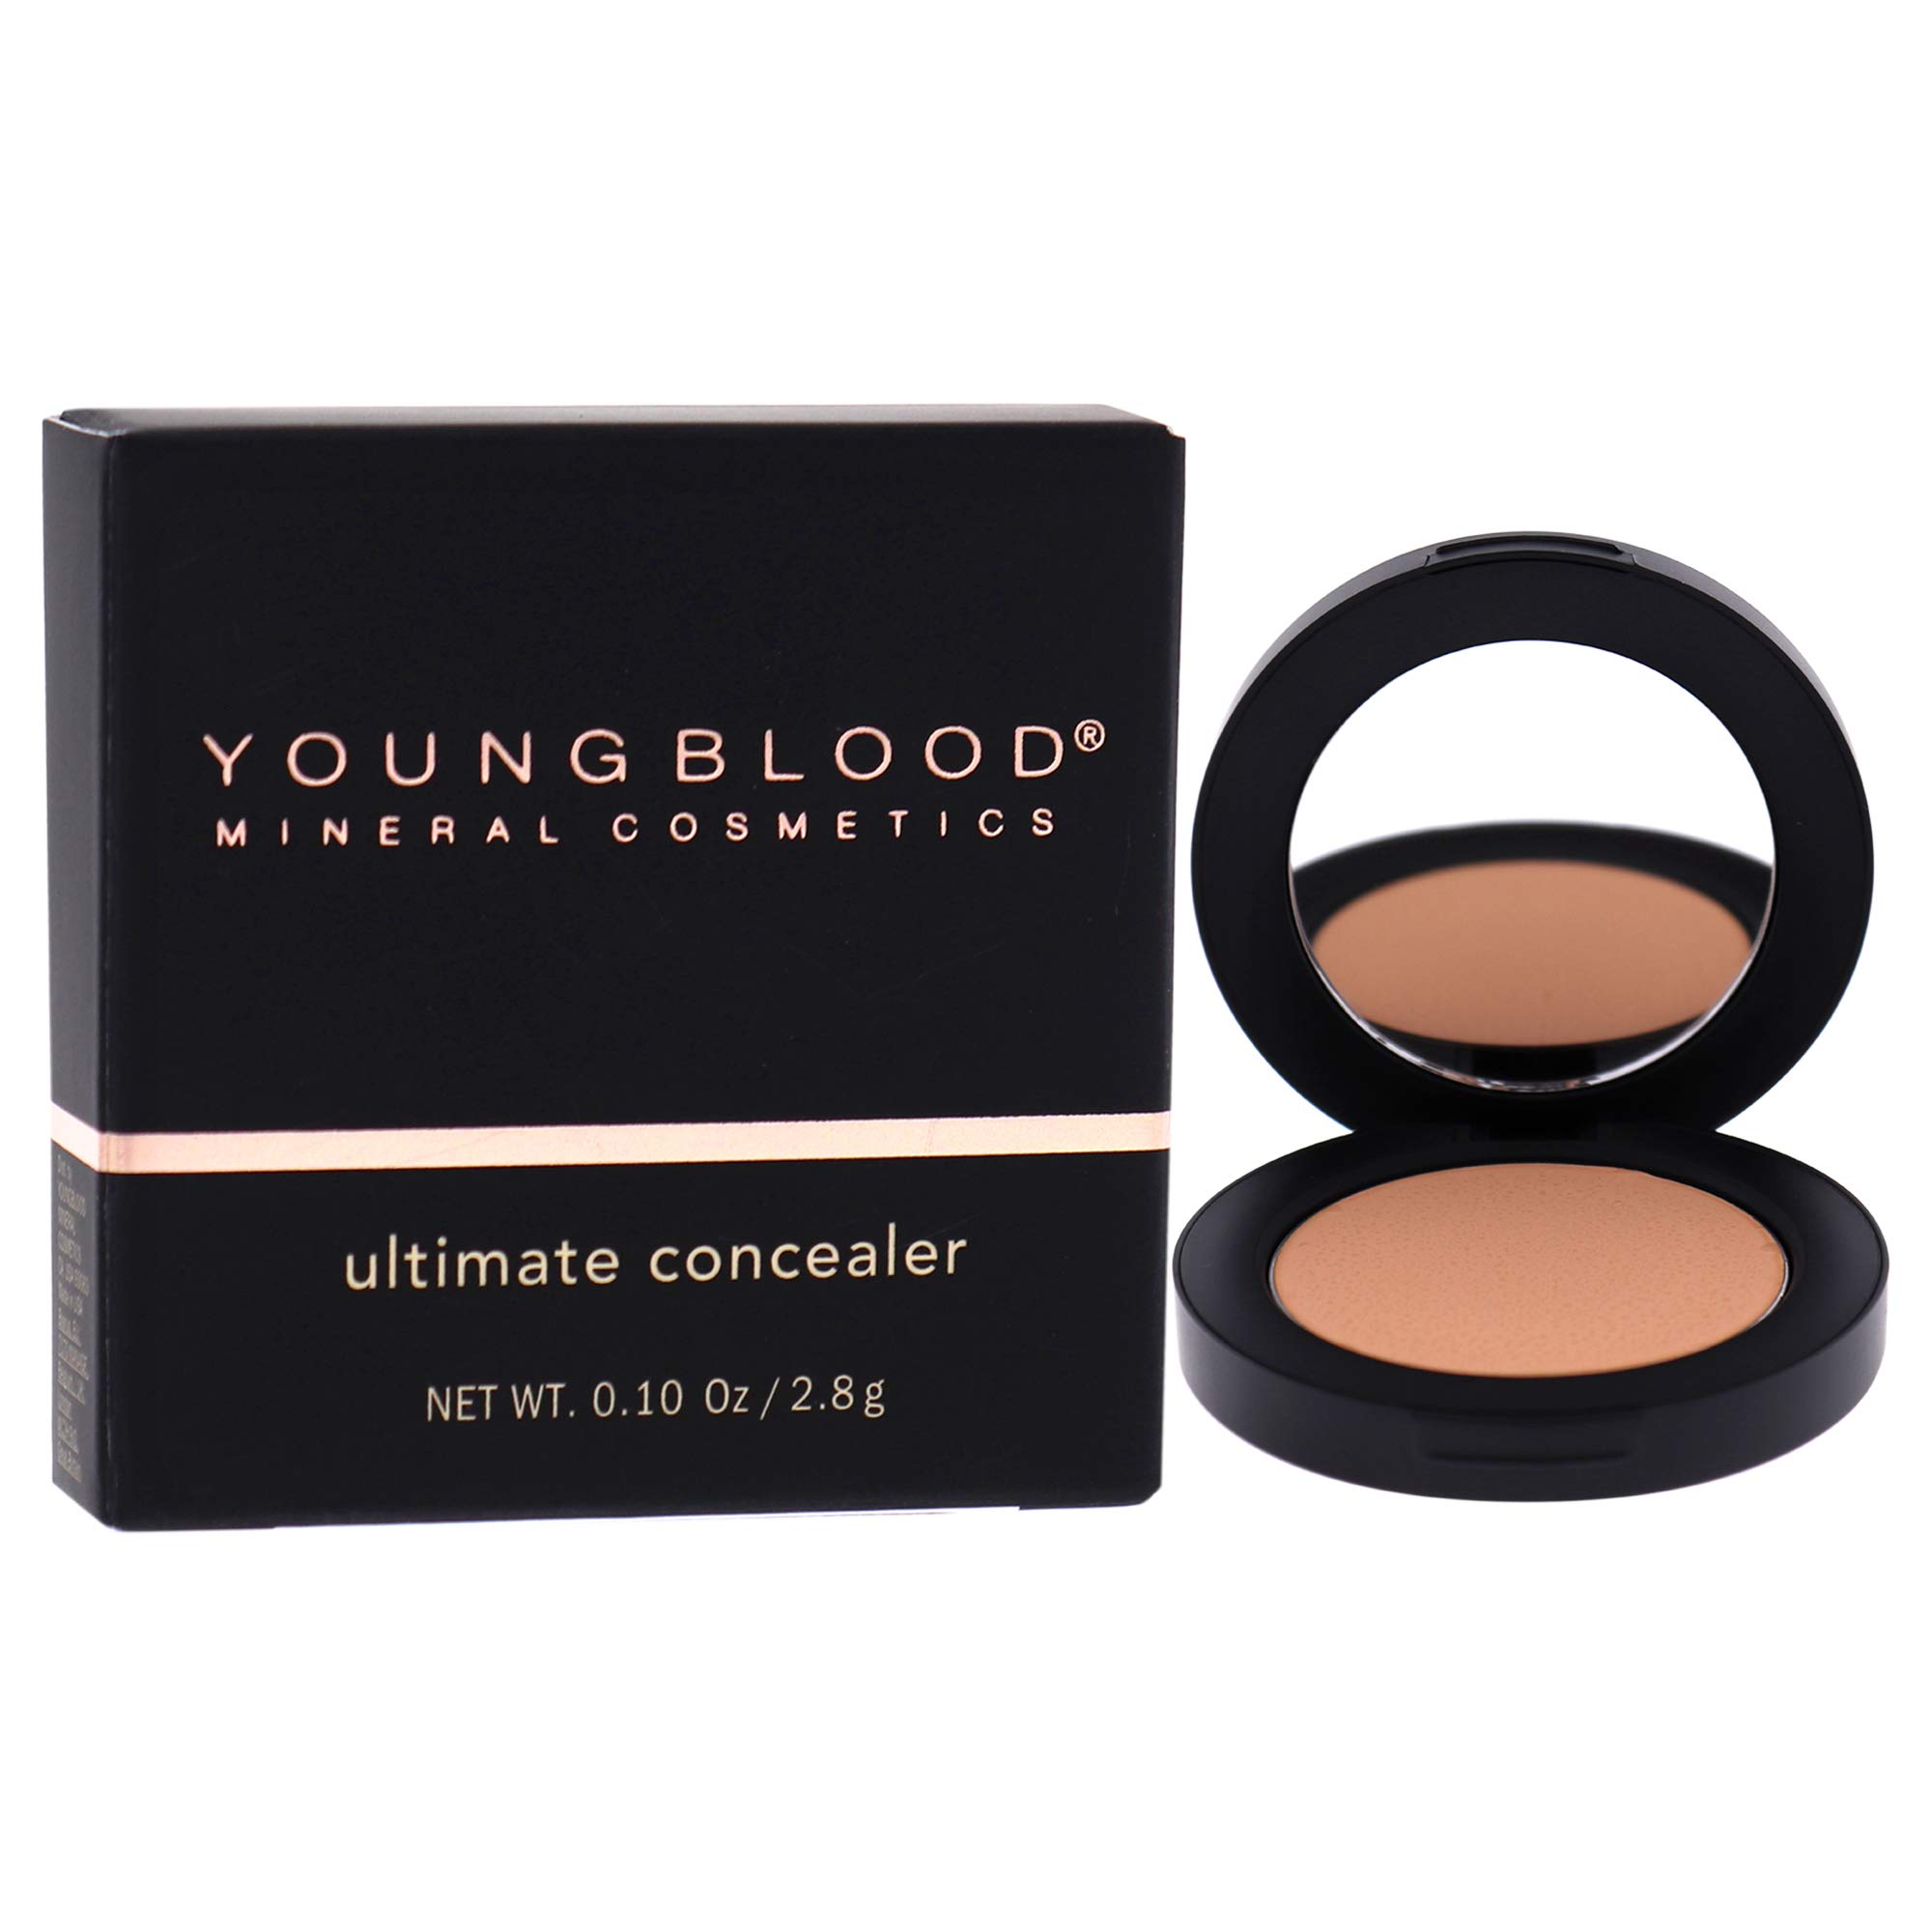 Youngblood Clean Luxury Cosmetics Ultimate Concealer, Medium | Conceals Under Eye Dark Circles Full Coverage Brightening Non-Creasing Coverage for Discoloration and Spots | Vegan, Cruelty Free